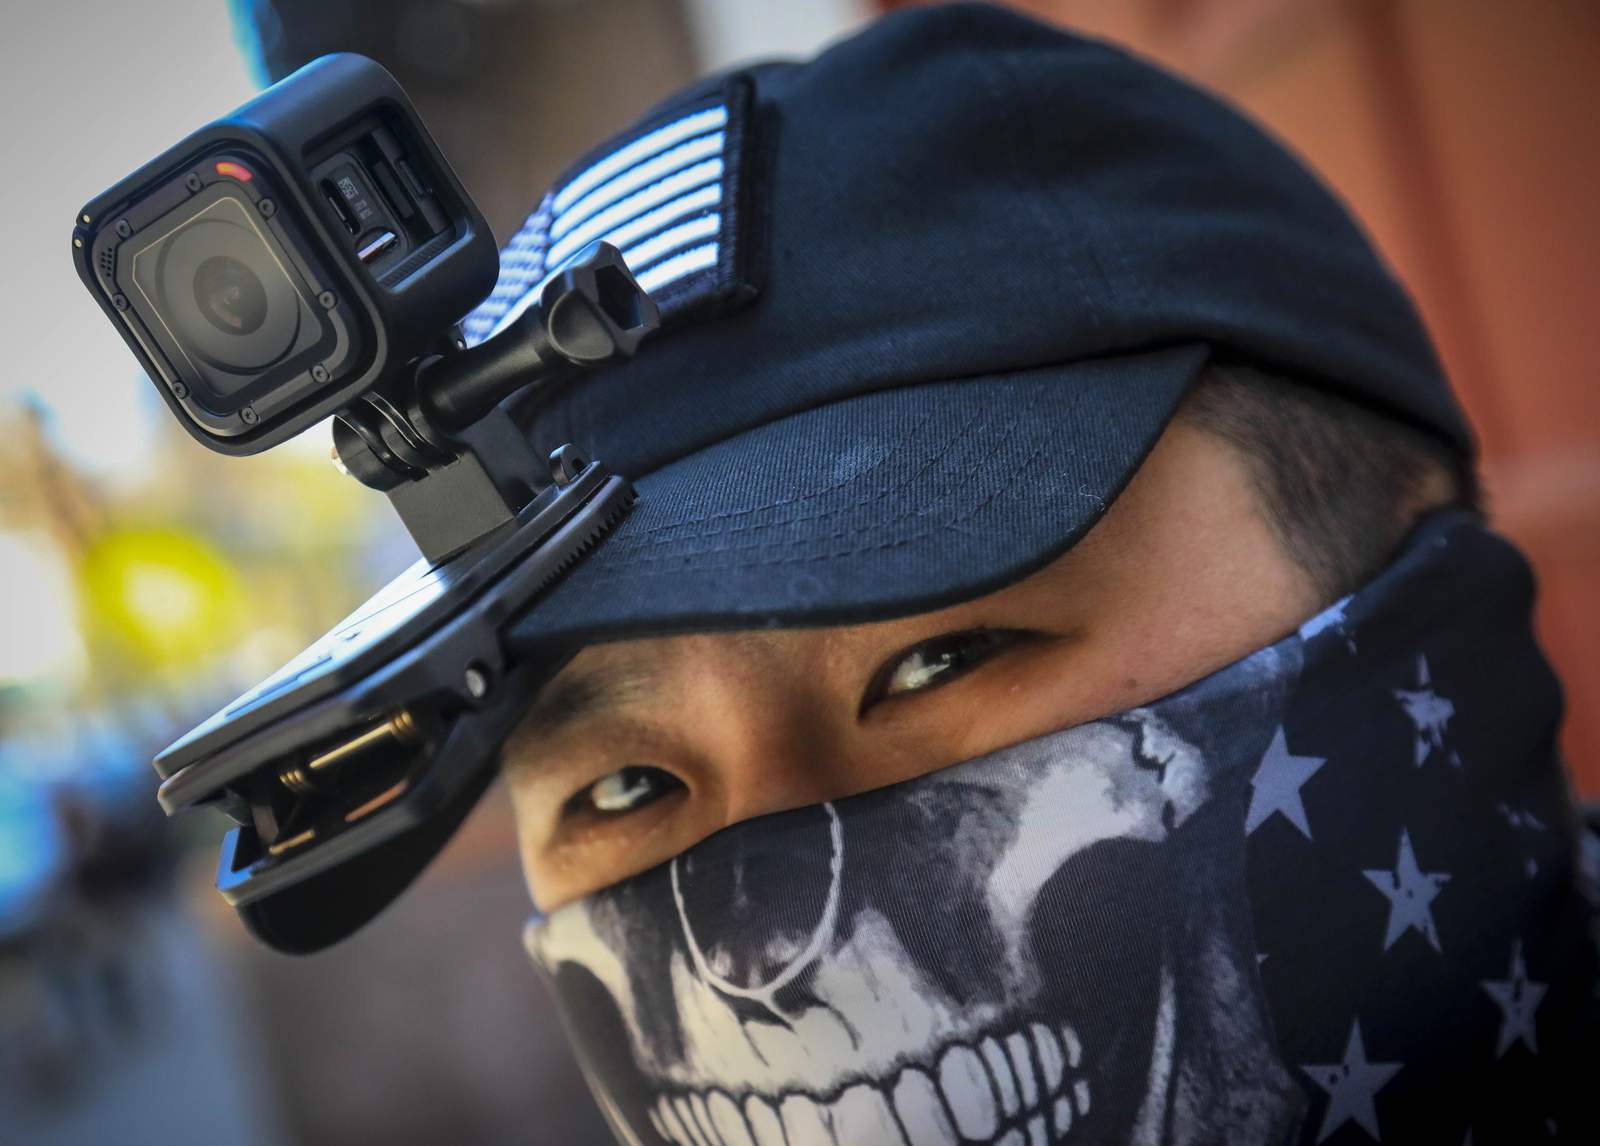 From guns to GoPros, Asian Americans seek to deter attacks